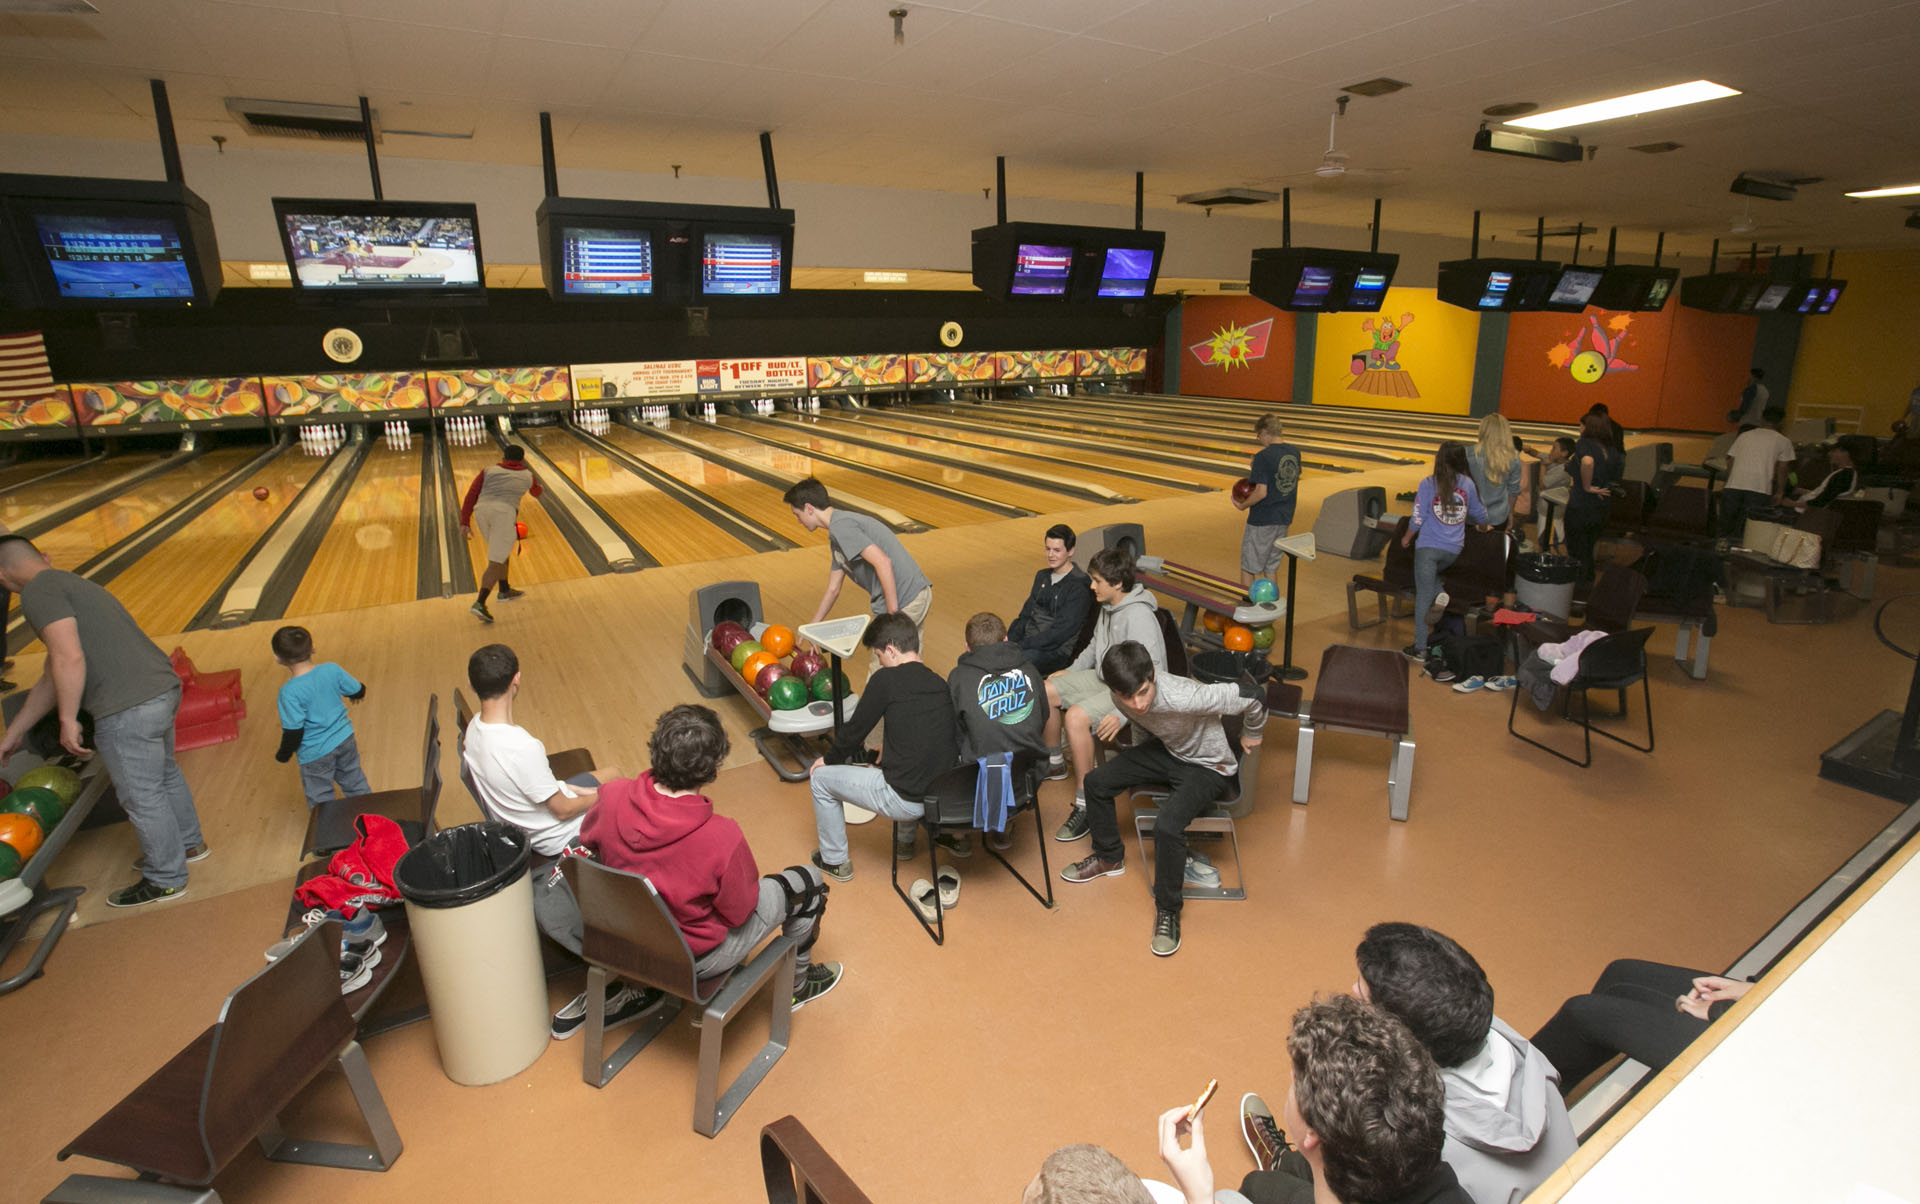 Fireside Lanes Bowling Citrus Heights